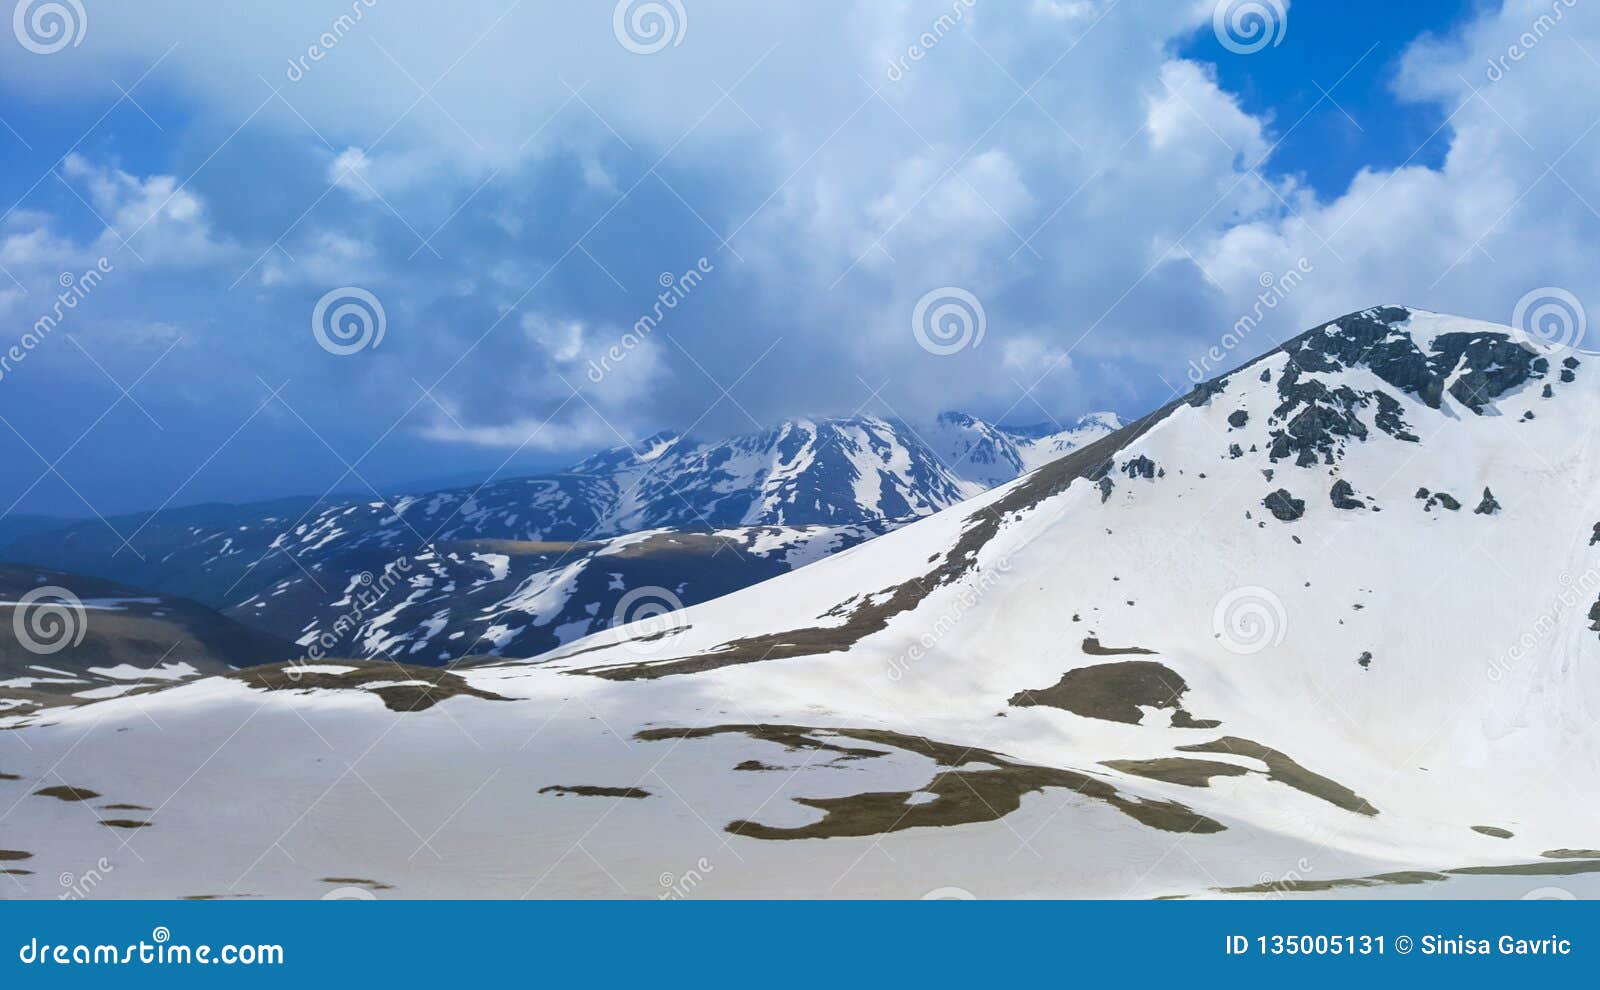 Majestic Mountain Peaks Covered With Snow And Soaring Blue Skies Stock